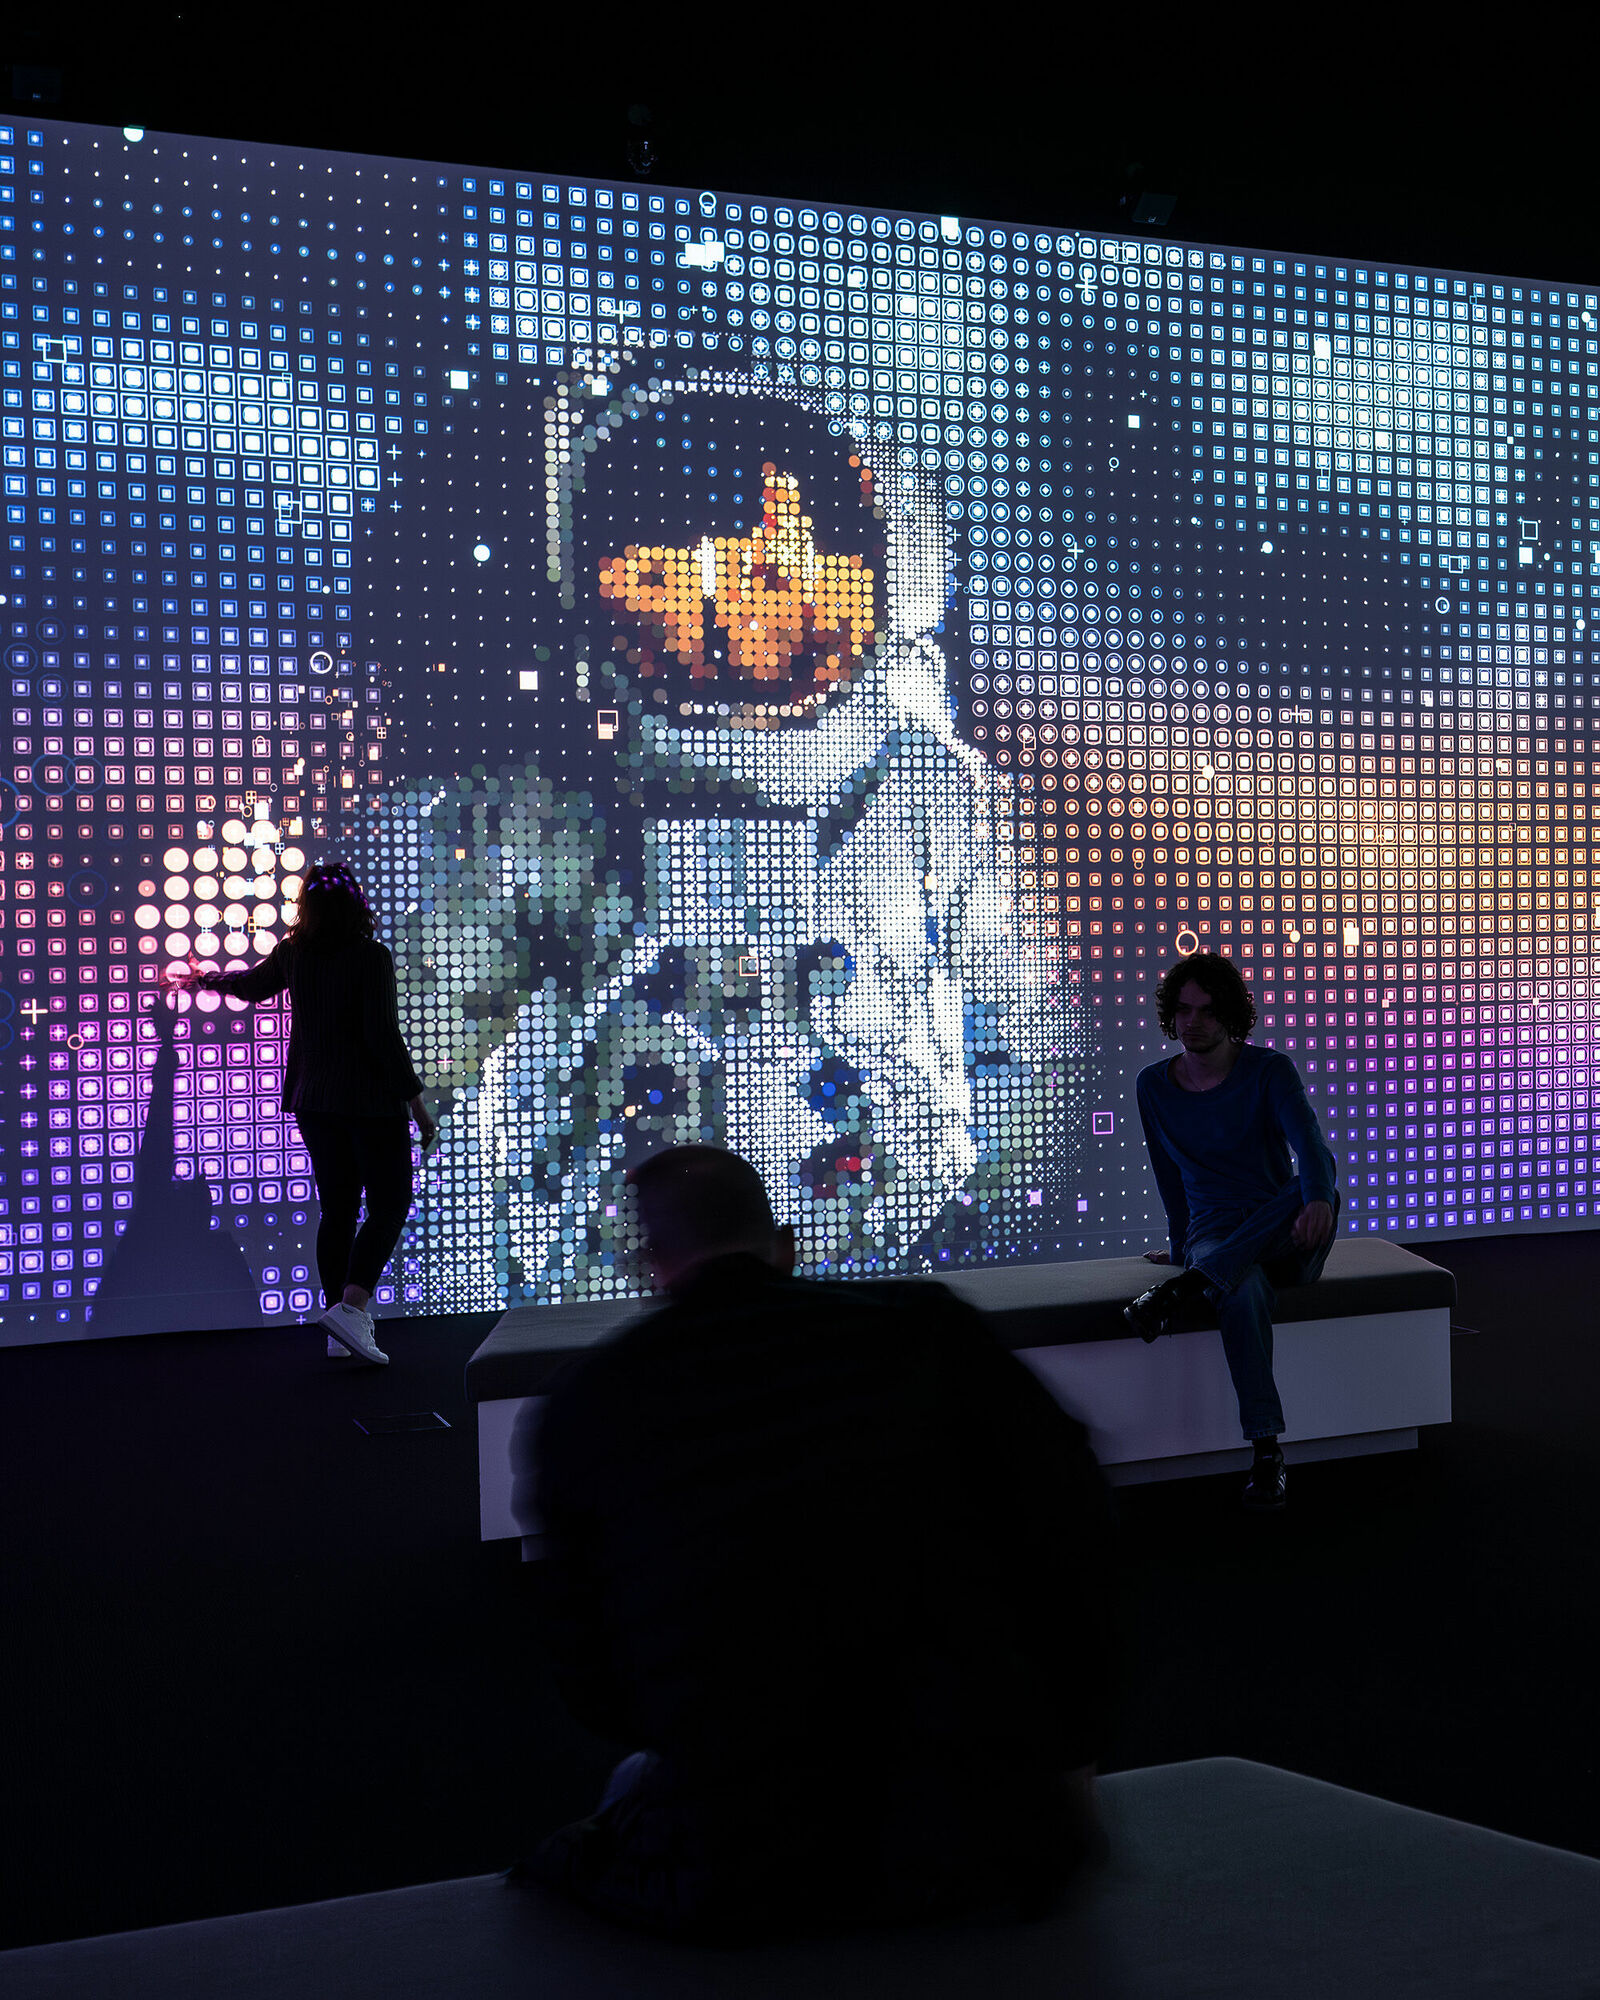 Visitors view a large wall display with pixelated depictions of an astronaut in space.